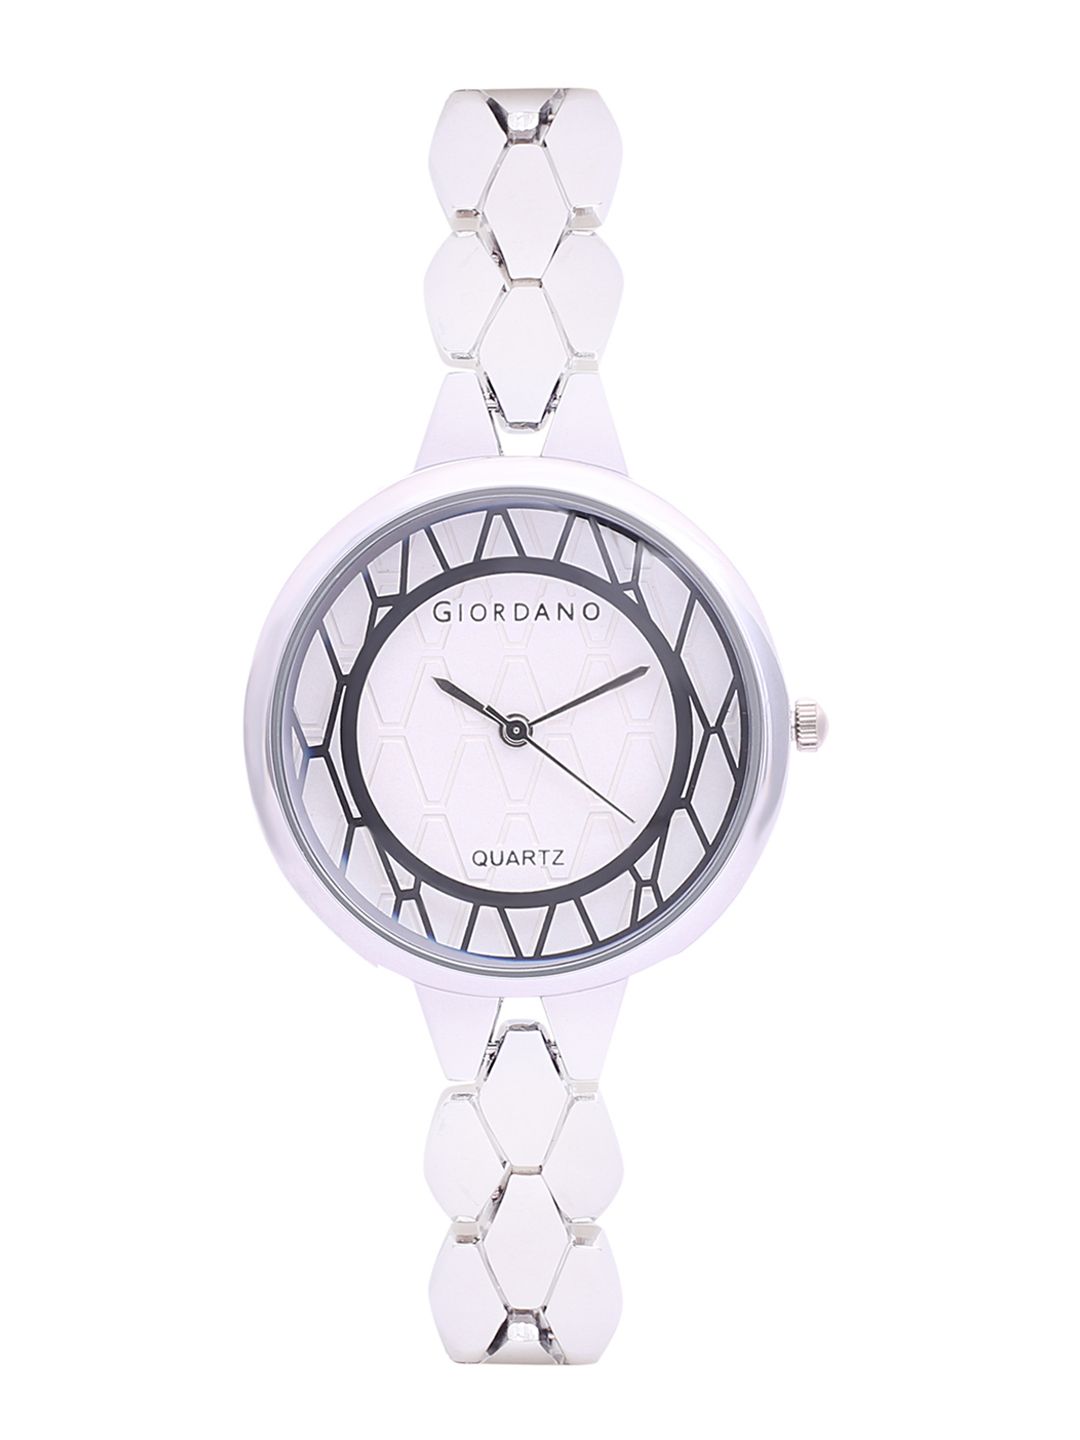 GIORDANO Women Silver-Toned Analogue Watch C2157 Price in India